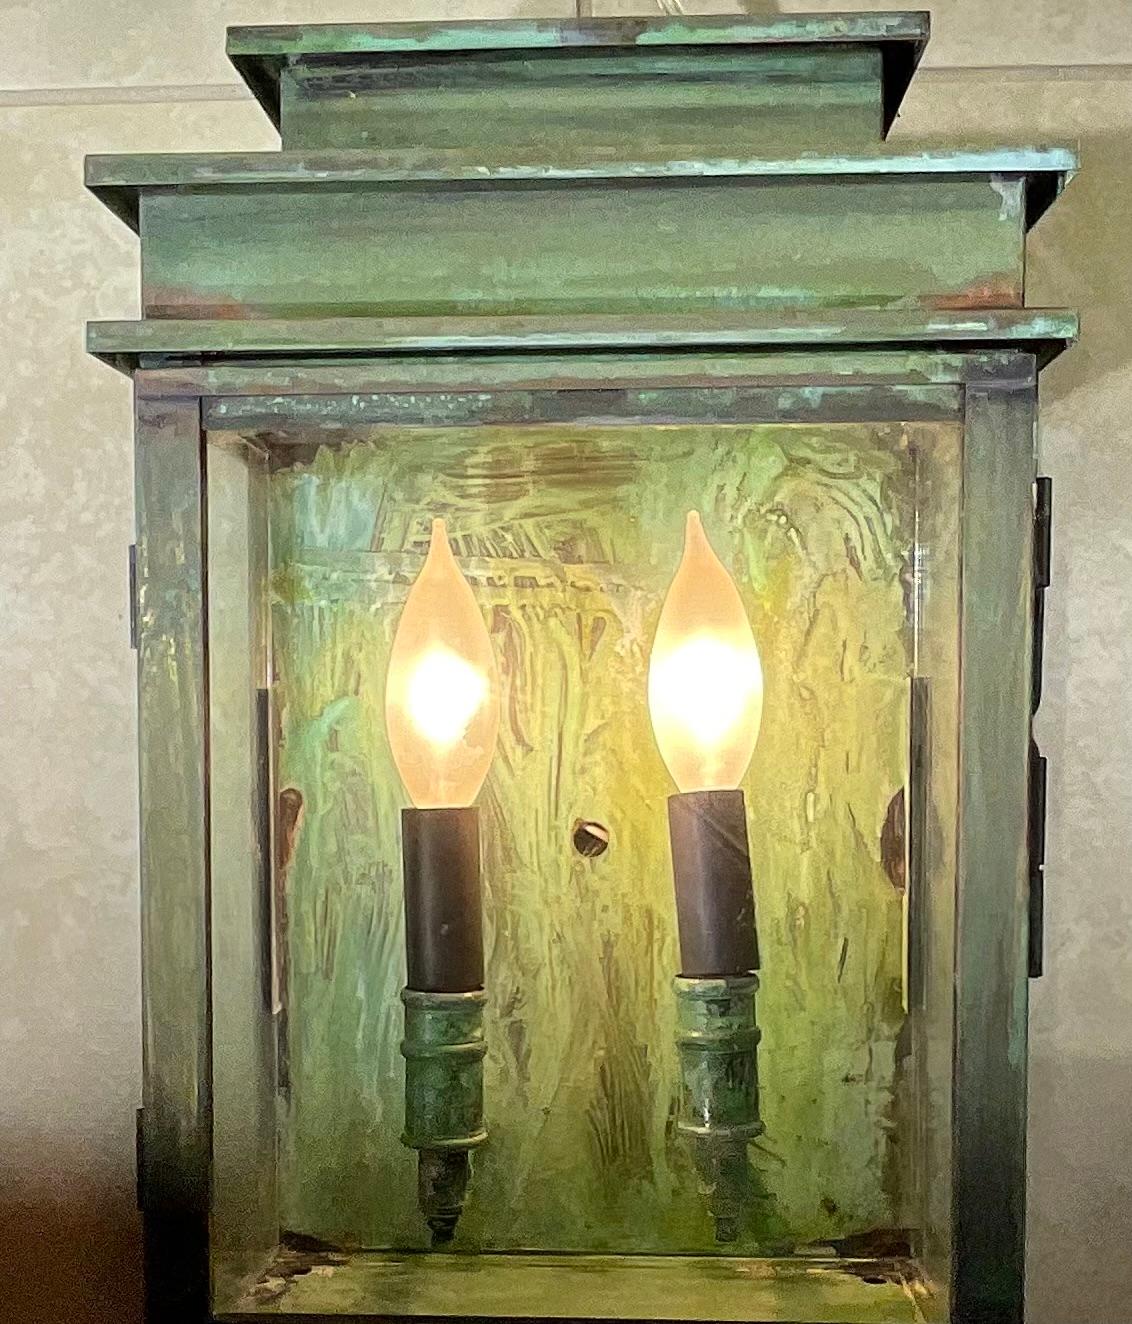 Hand crafted wall lantern made of solid brass .two 60/watt lights, clear glass, UL approved, suitable for wet location ready for use. Beautiful green oxidization patina.